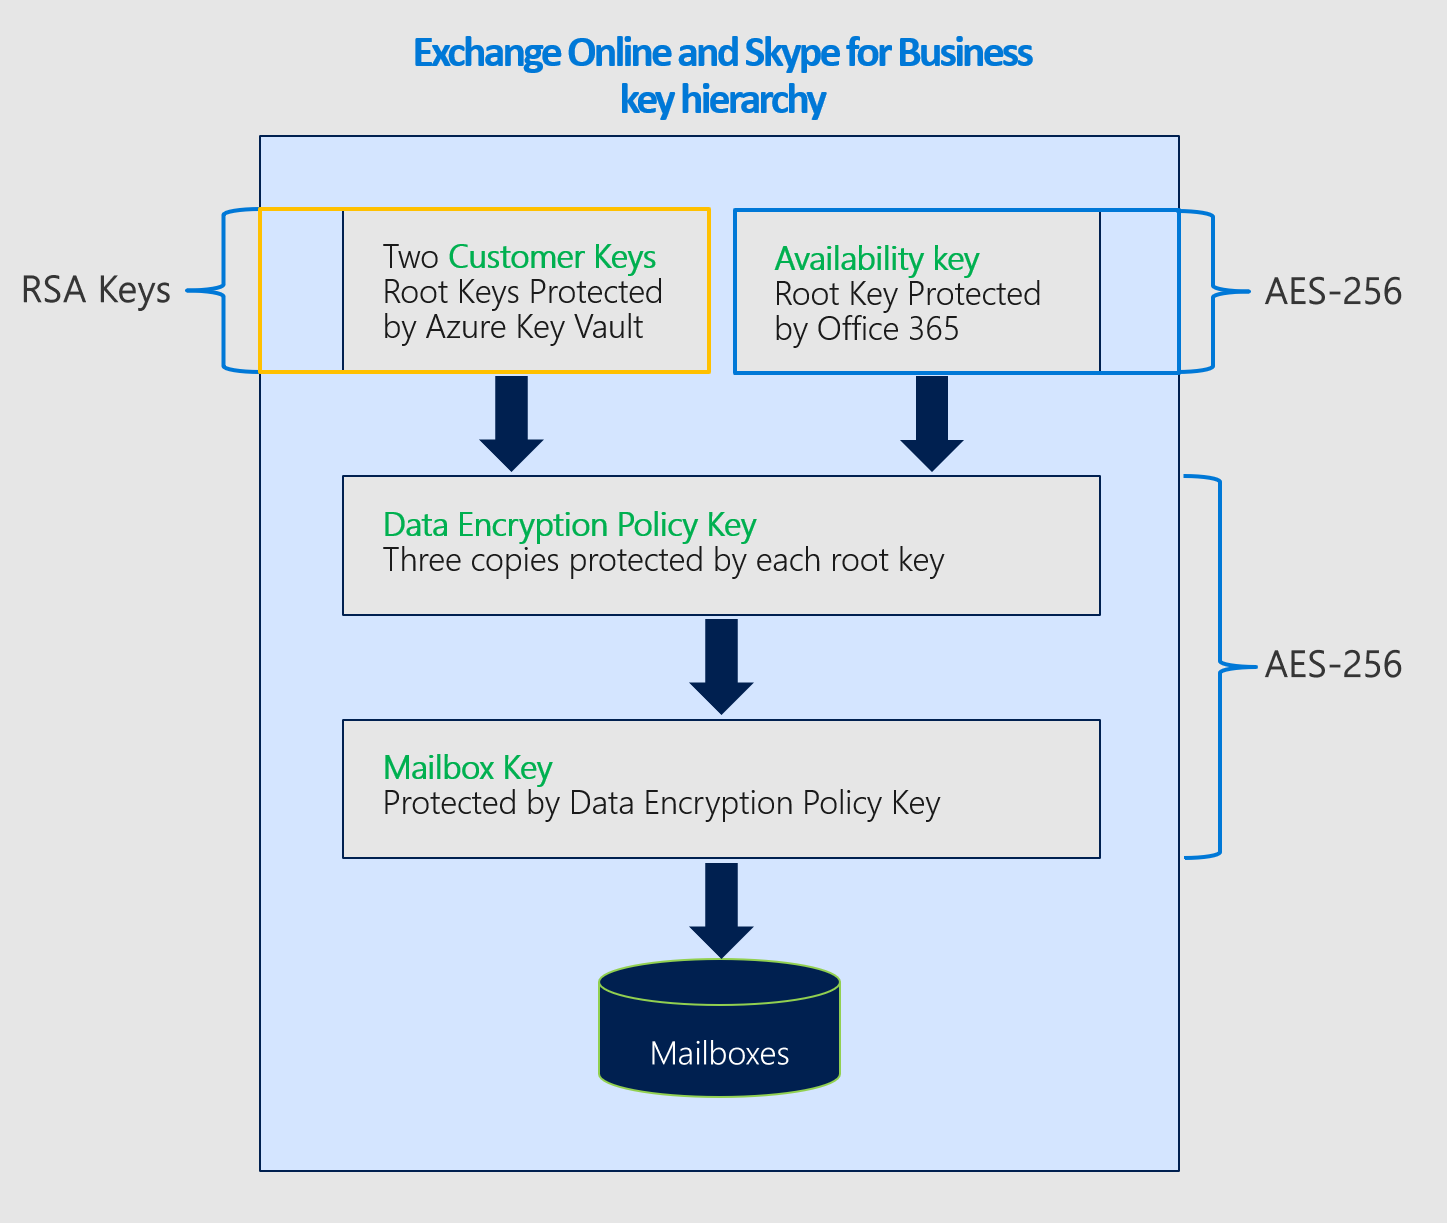 Encryption ciphers for Exchange Online in Customer Key